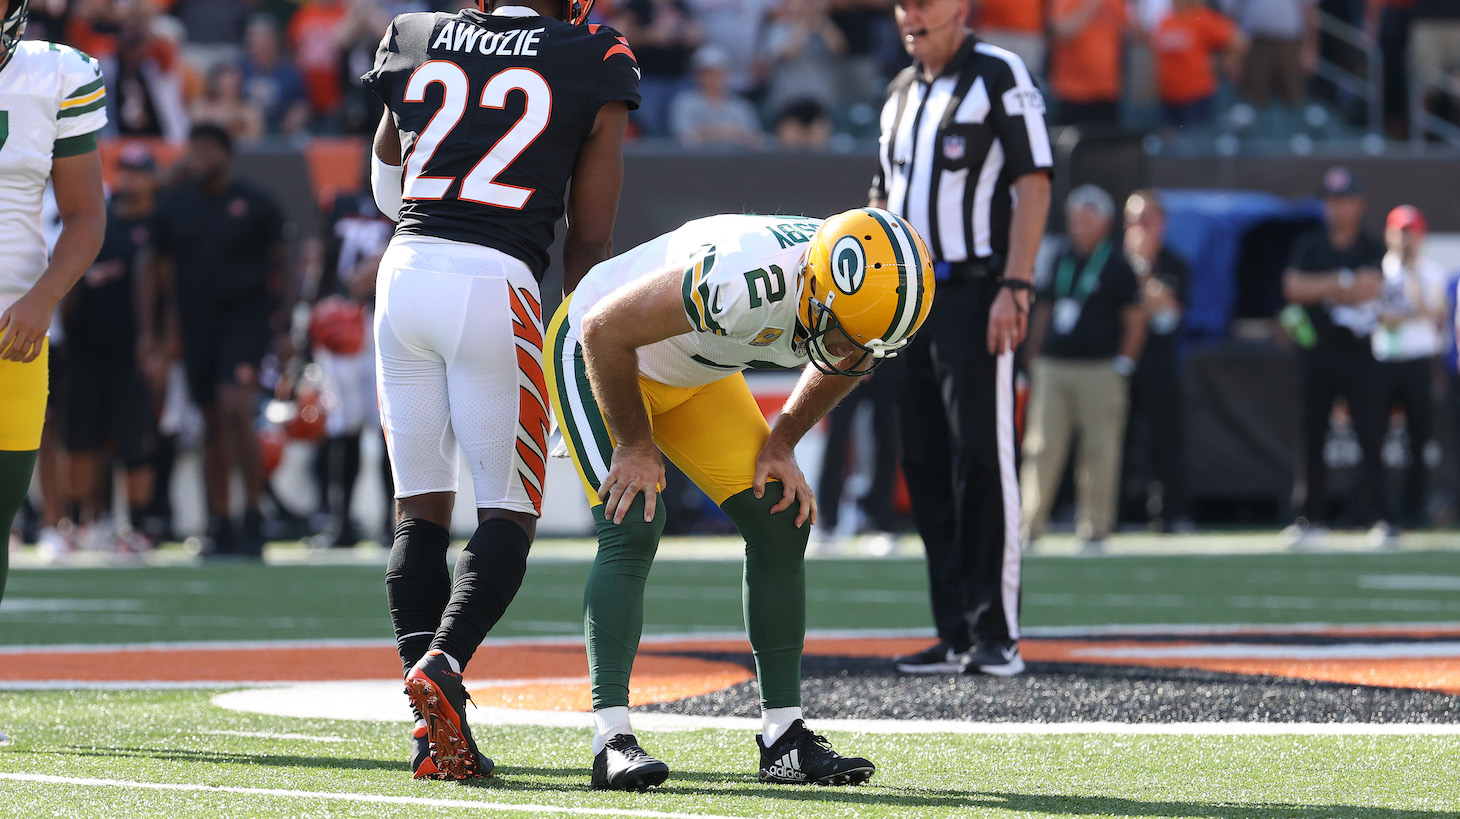 CINCINNATI, OHIO - OCTOBER 10: Mason Crosby #2 of the Green Bay Packers reacts after missing a field goal during overtime against the Cincinnati Bengals at Paul Brown Stadium on October 10, 2021 in Cincinnati, Ohio. (Photo by Andy Lyons/Getty Images)